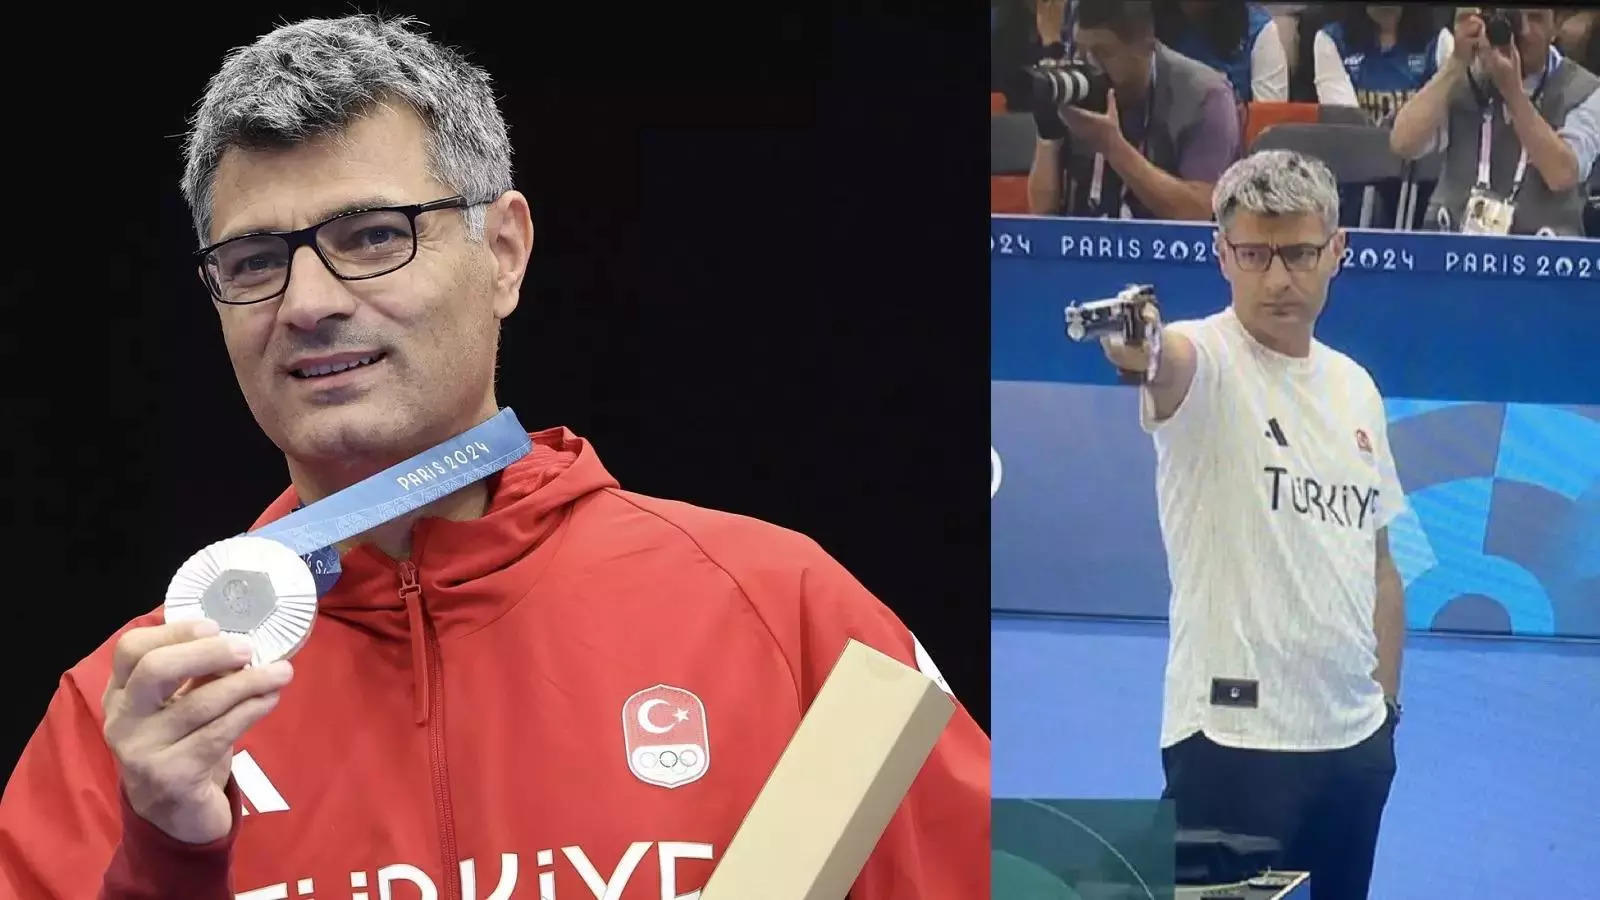 Turkey shooter Yusuf Dikec's casual and no-gear look at Paris Olympics that won him the silver medal in shooting viral on social media 